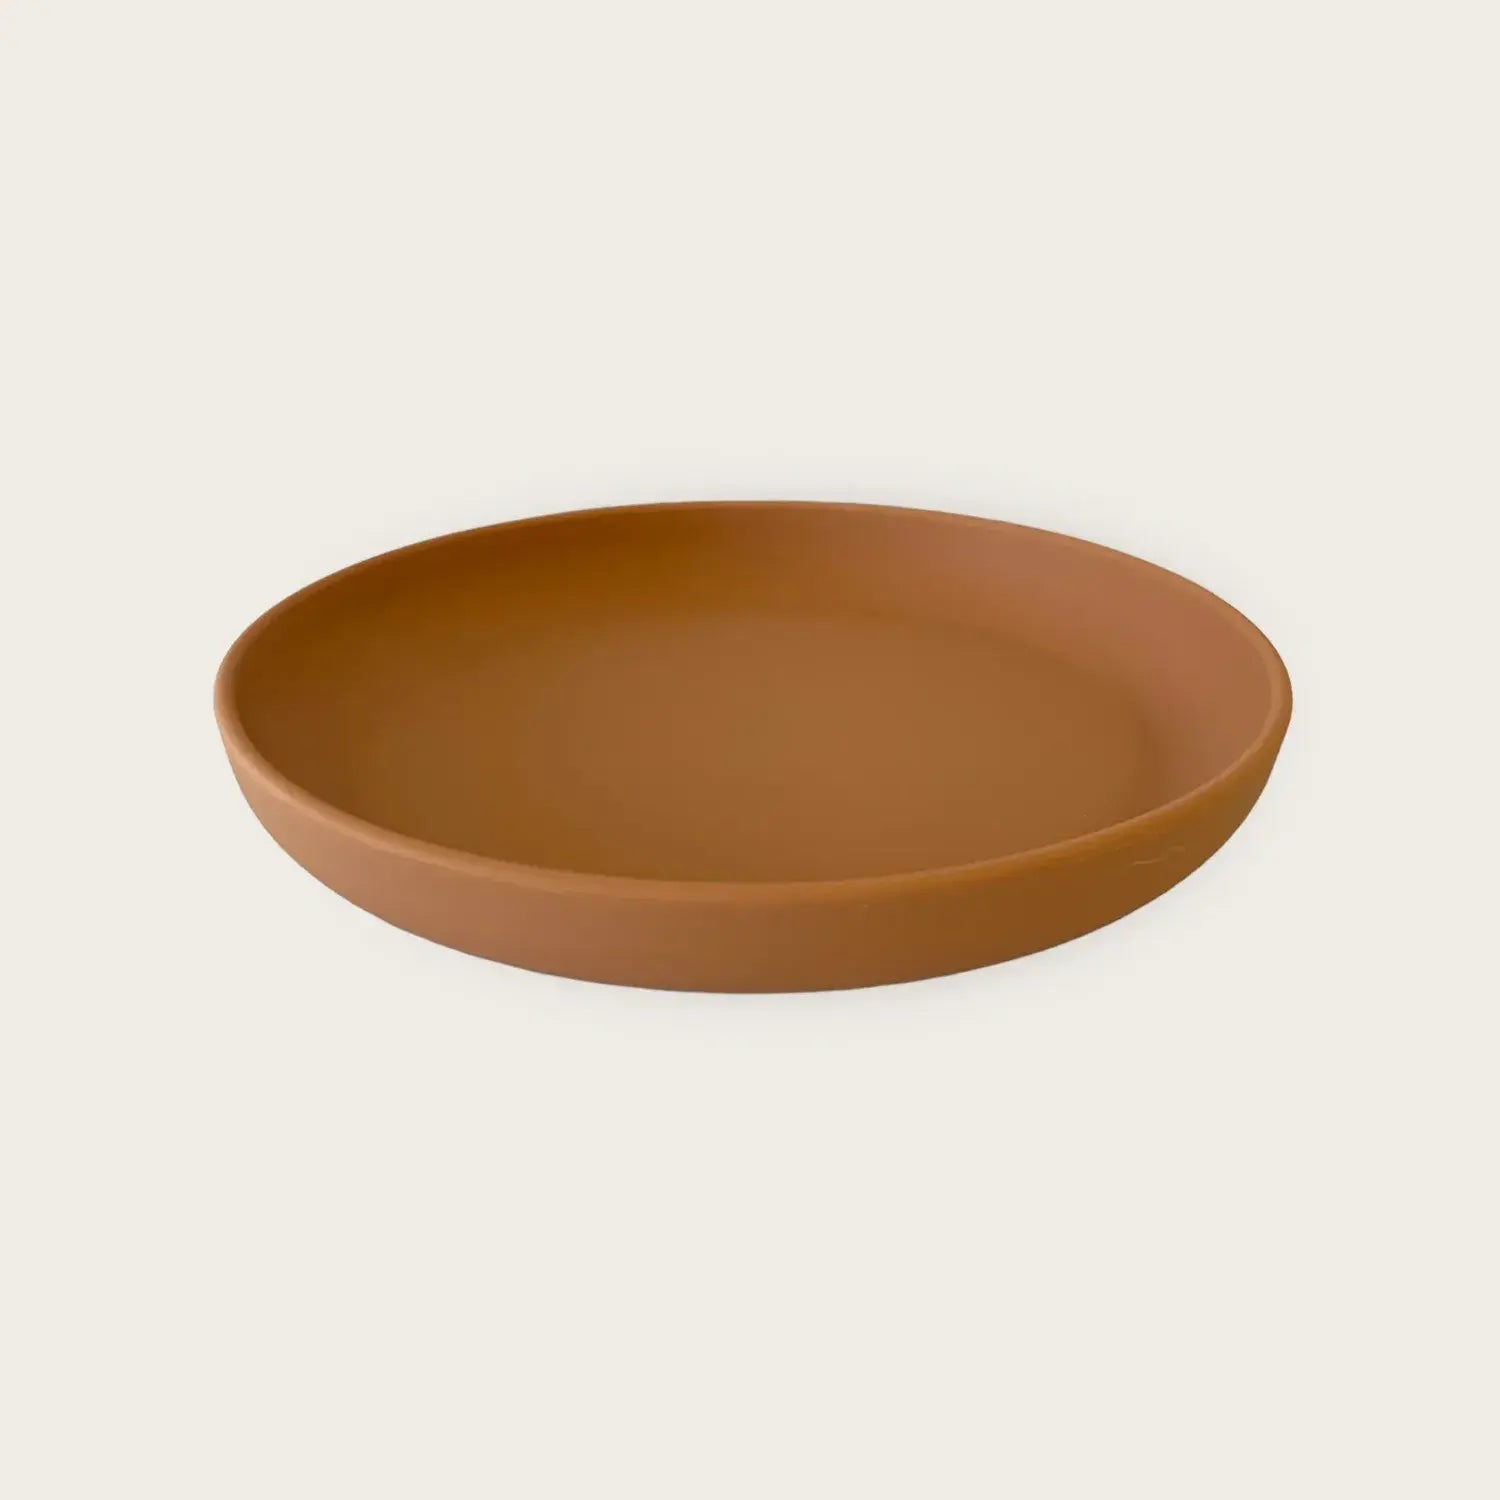 Silicone Plate - Cinnamon by Rommer Co